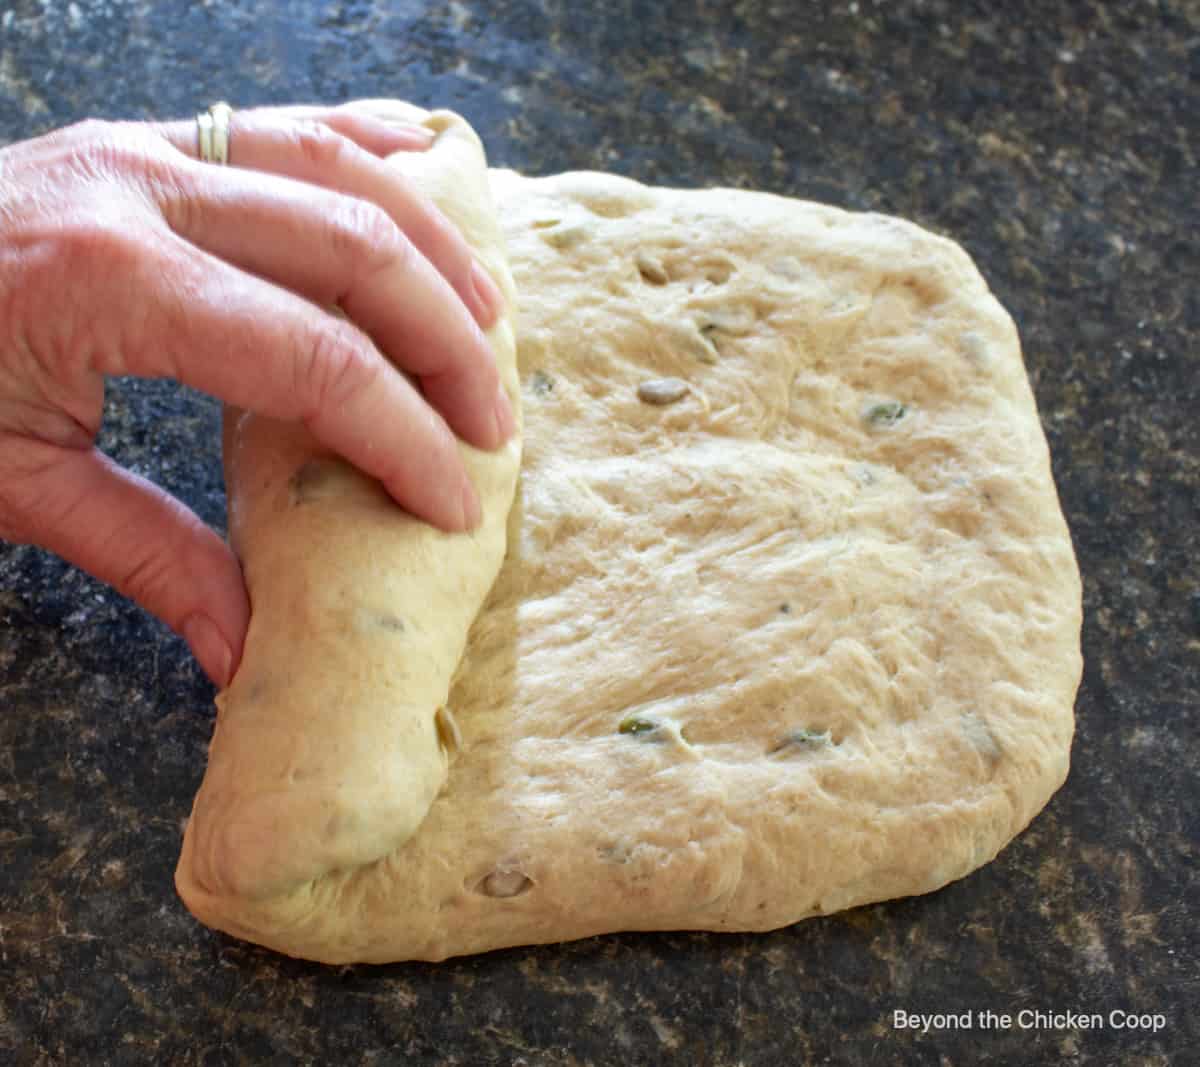 Rolling up bread dough into a log shape.